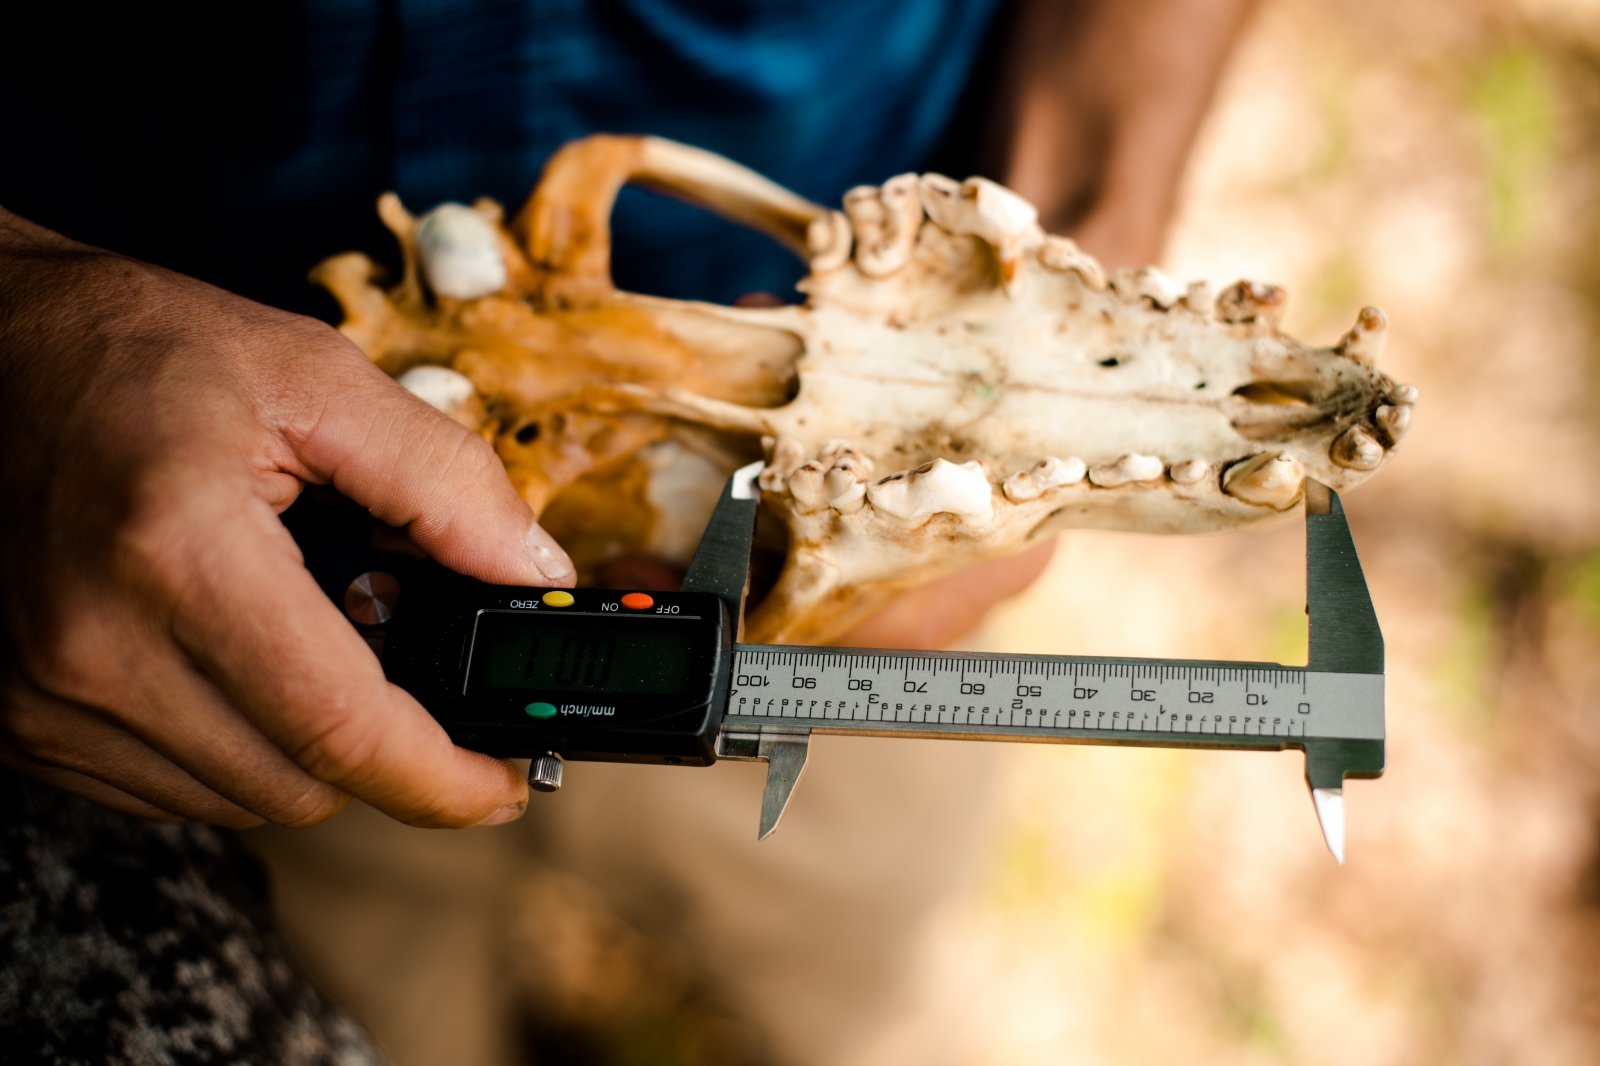 The mouth of a wolf skull, teeth-side up, measured by handheld calipers.